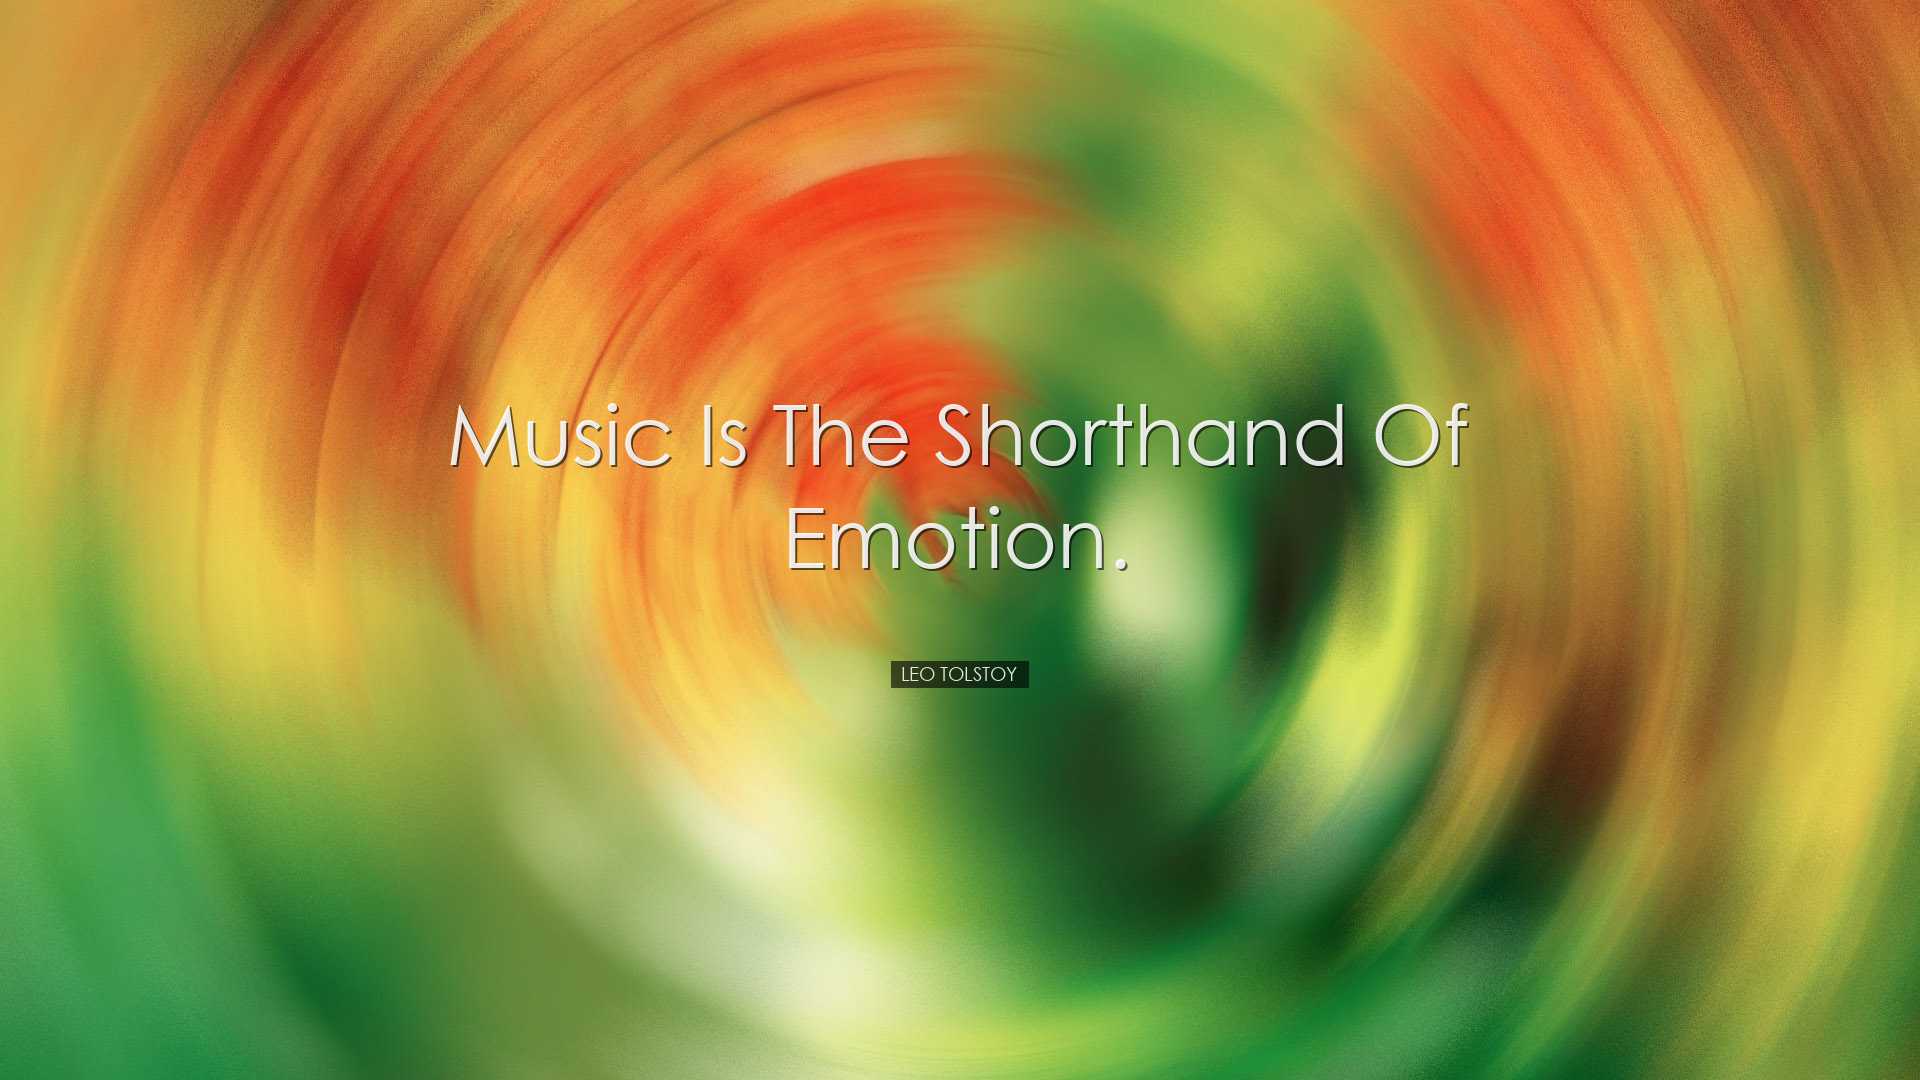 Music is the shorthand of emotion. - Leo Tolstoy